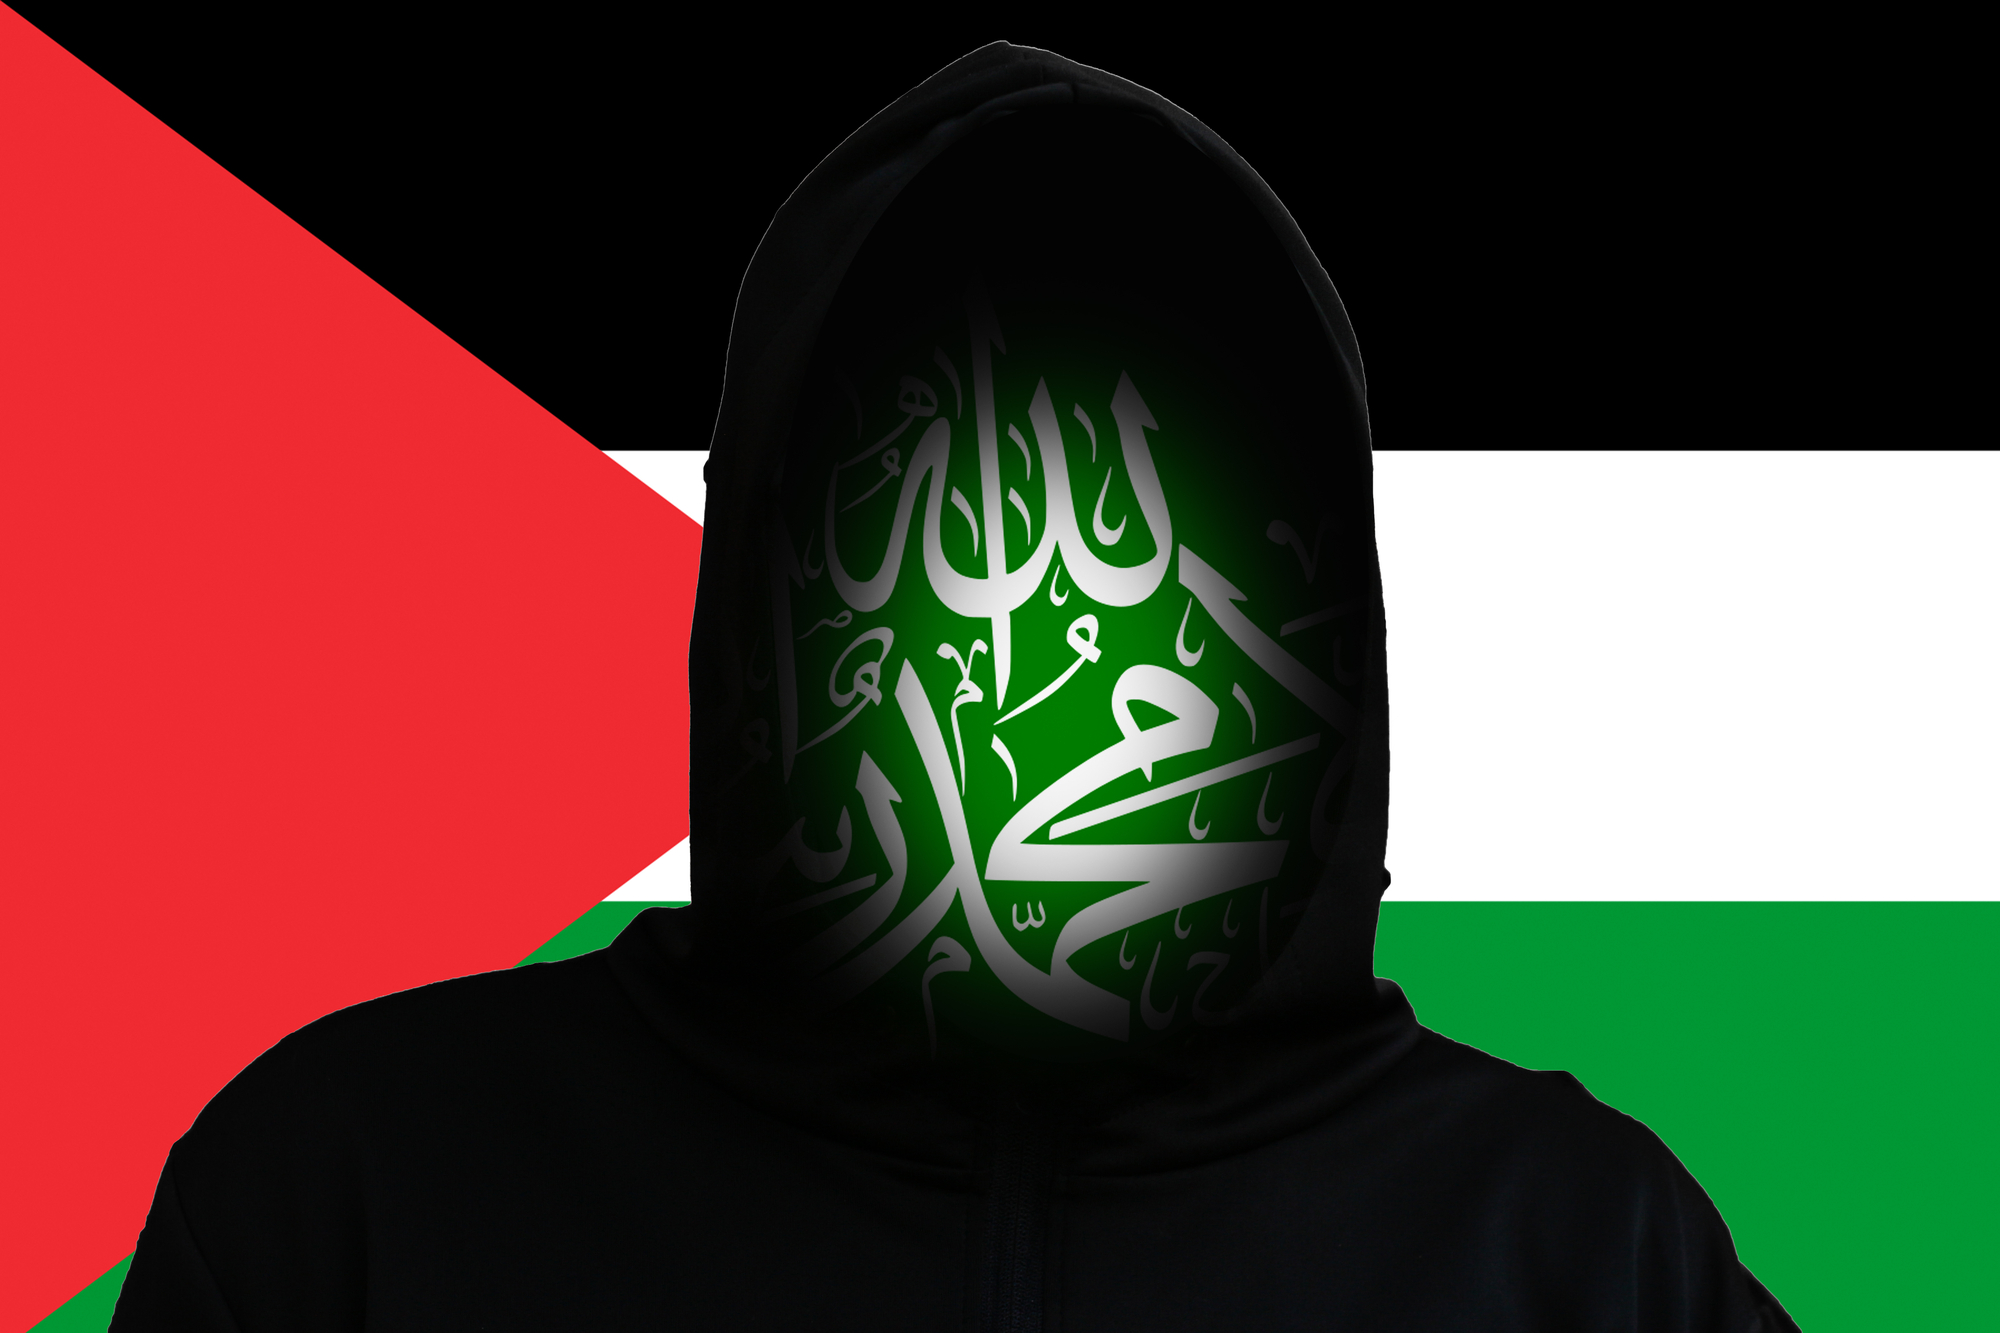 Incognito terrorist on the Flag Palestine background. Hamas between Israel and Palestine. Israel Palestine war. World crisis in Middle East. Rebellion. Rebel militant terrorist guerrilla concept